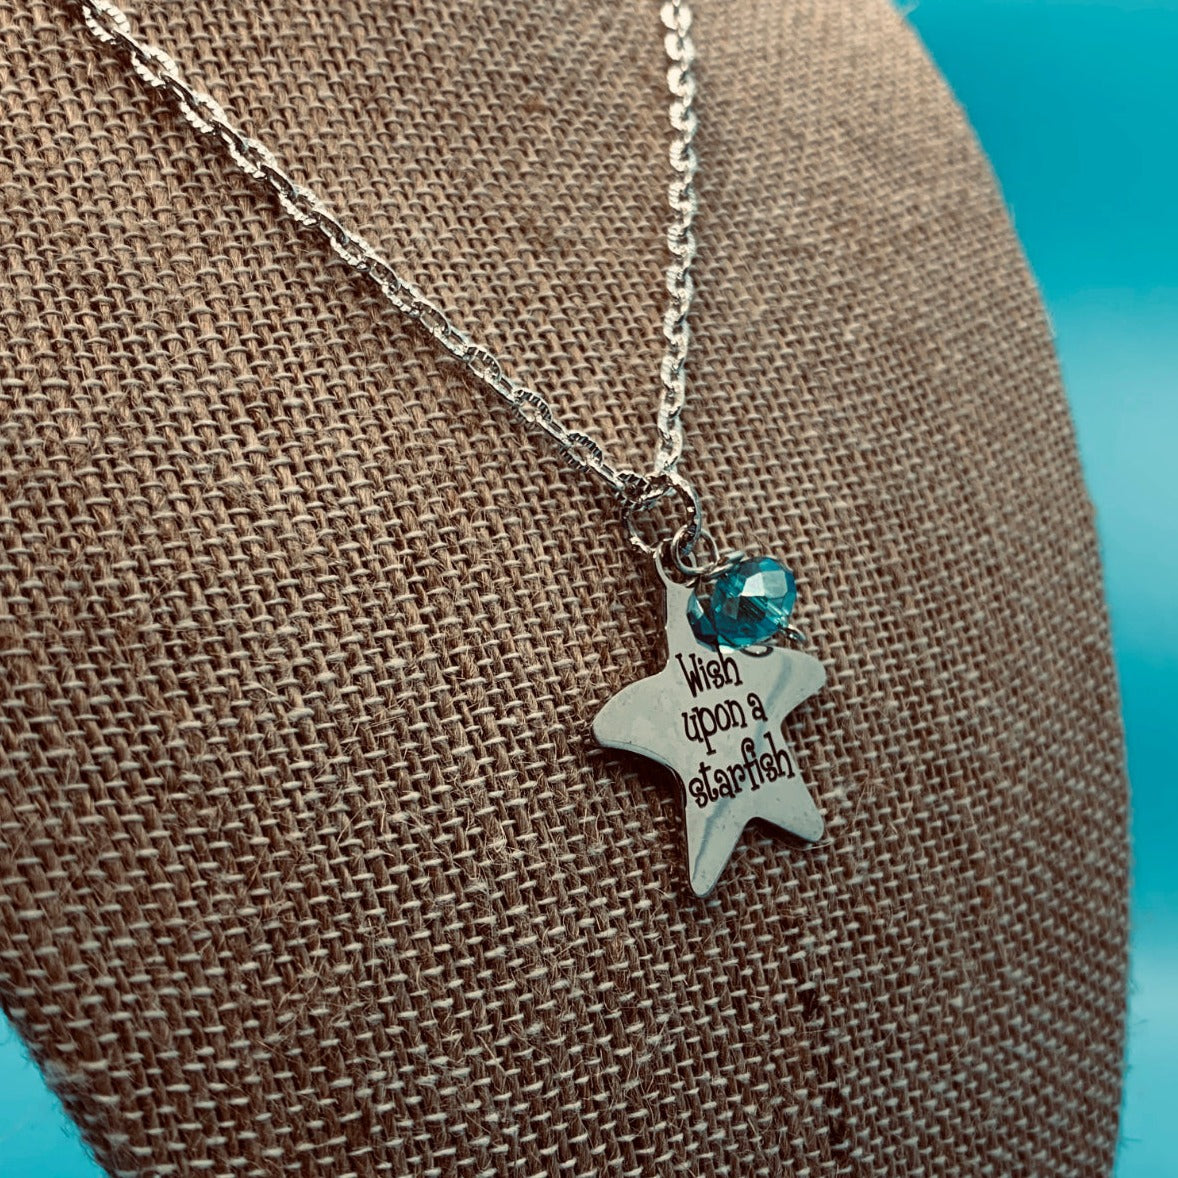 Wish Upon a Starfish 2, Necklace